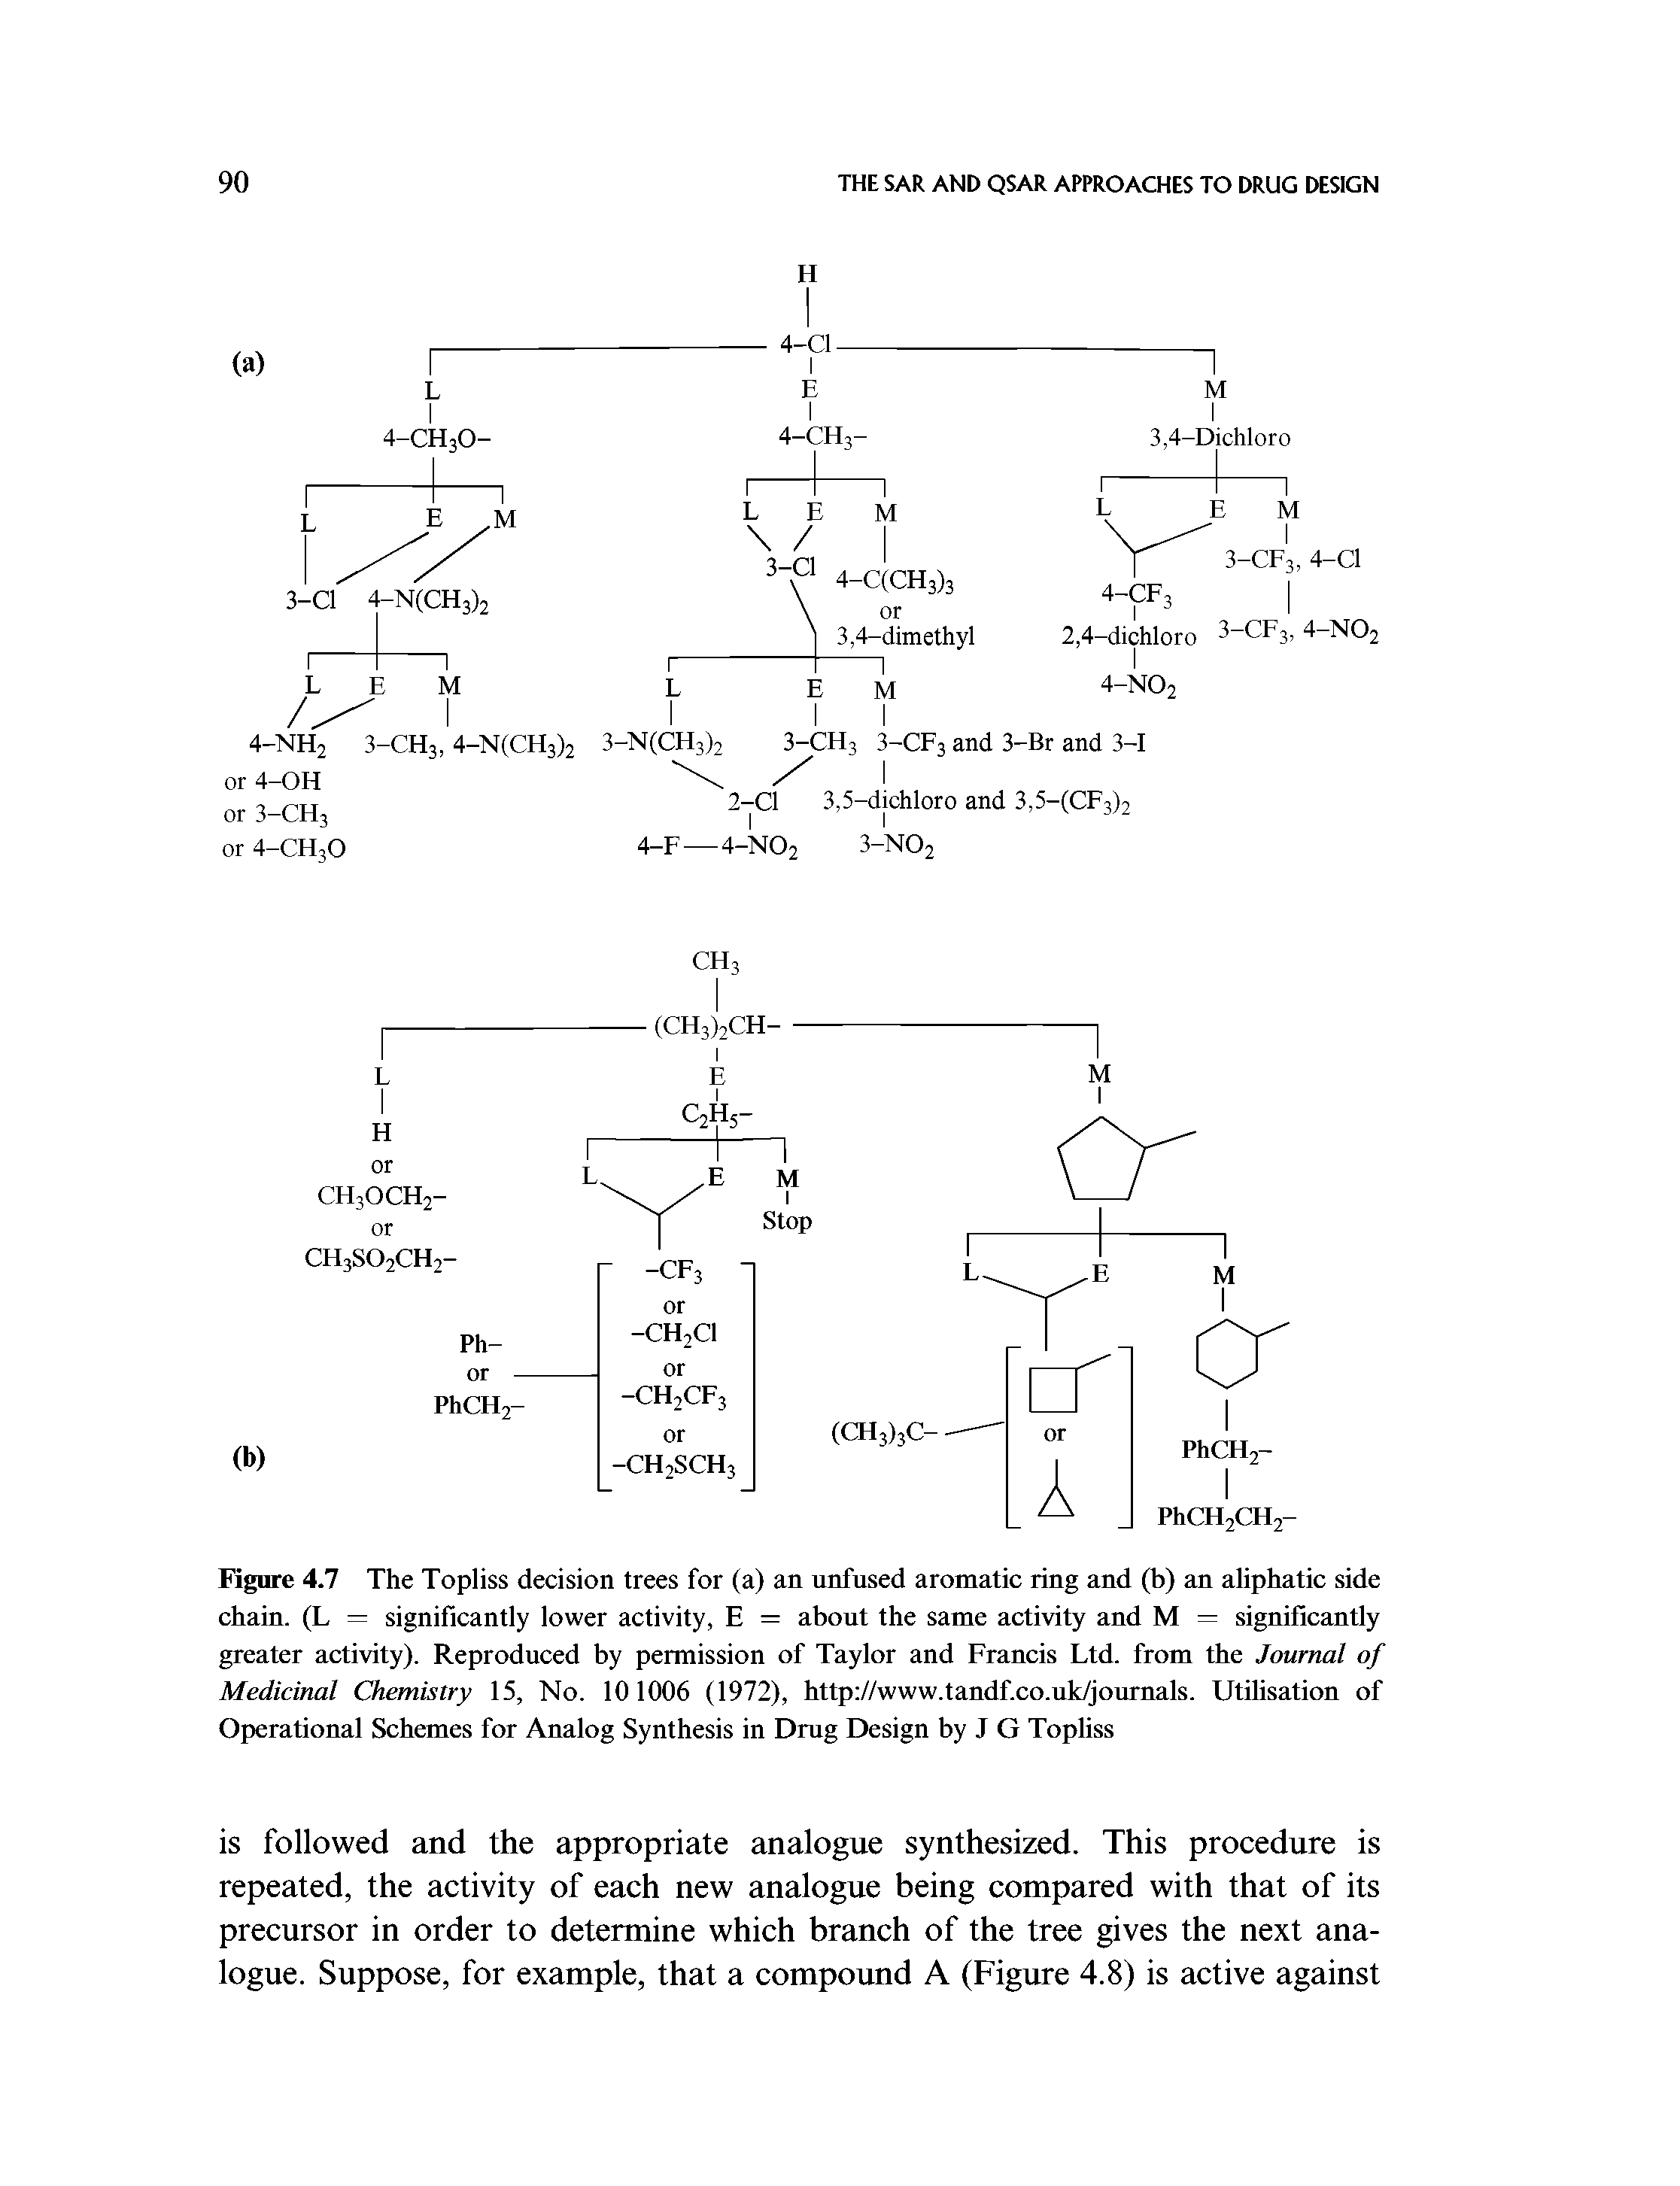 Figure 4.7 The Topliss decision trees for (a) an unfused aromatic ring and (b) an aliphatic side chain. (L = significantly lower activity, E = about the same activity and M = significantly greater activity). Reproduced by permission of Taylor and Francis Ltd. from the Journal of Medicinal Chemistry 15, No. 101006 (1972), http //www.tandf.co.uk/journals. Utilisation of Operational Schemes for Analog Synthesis in Drug Design by J G Topliss...